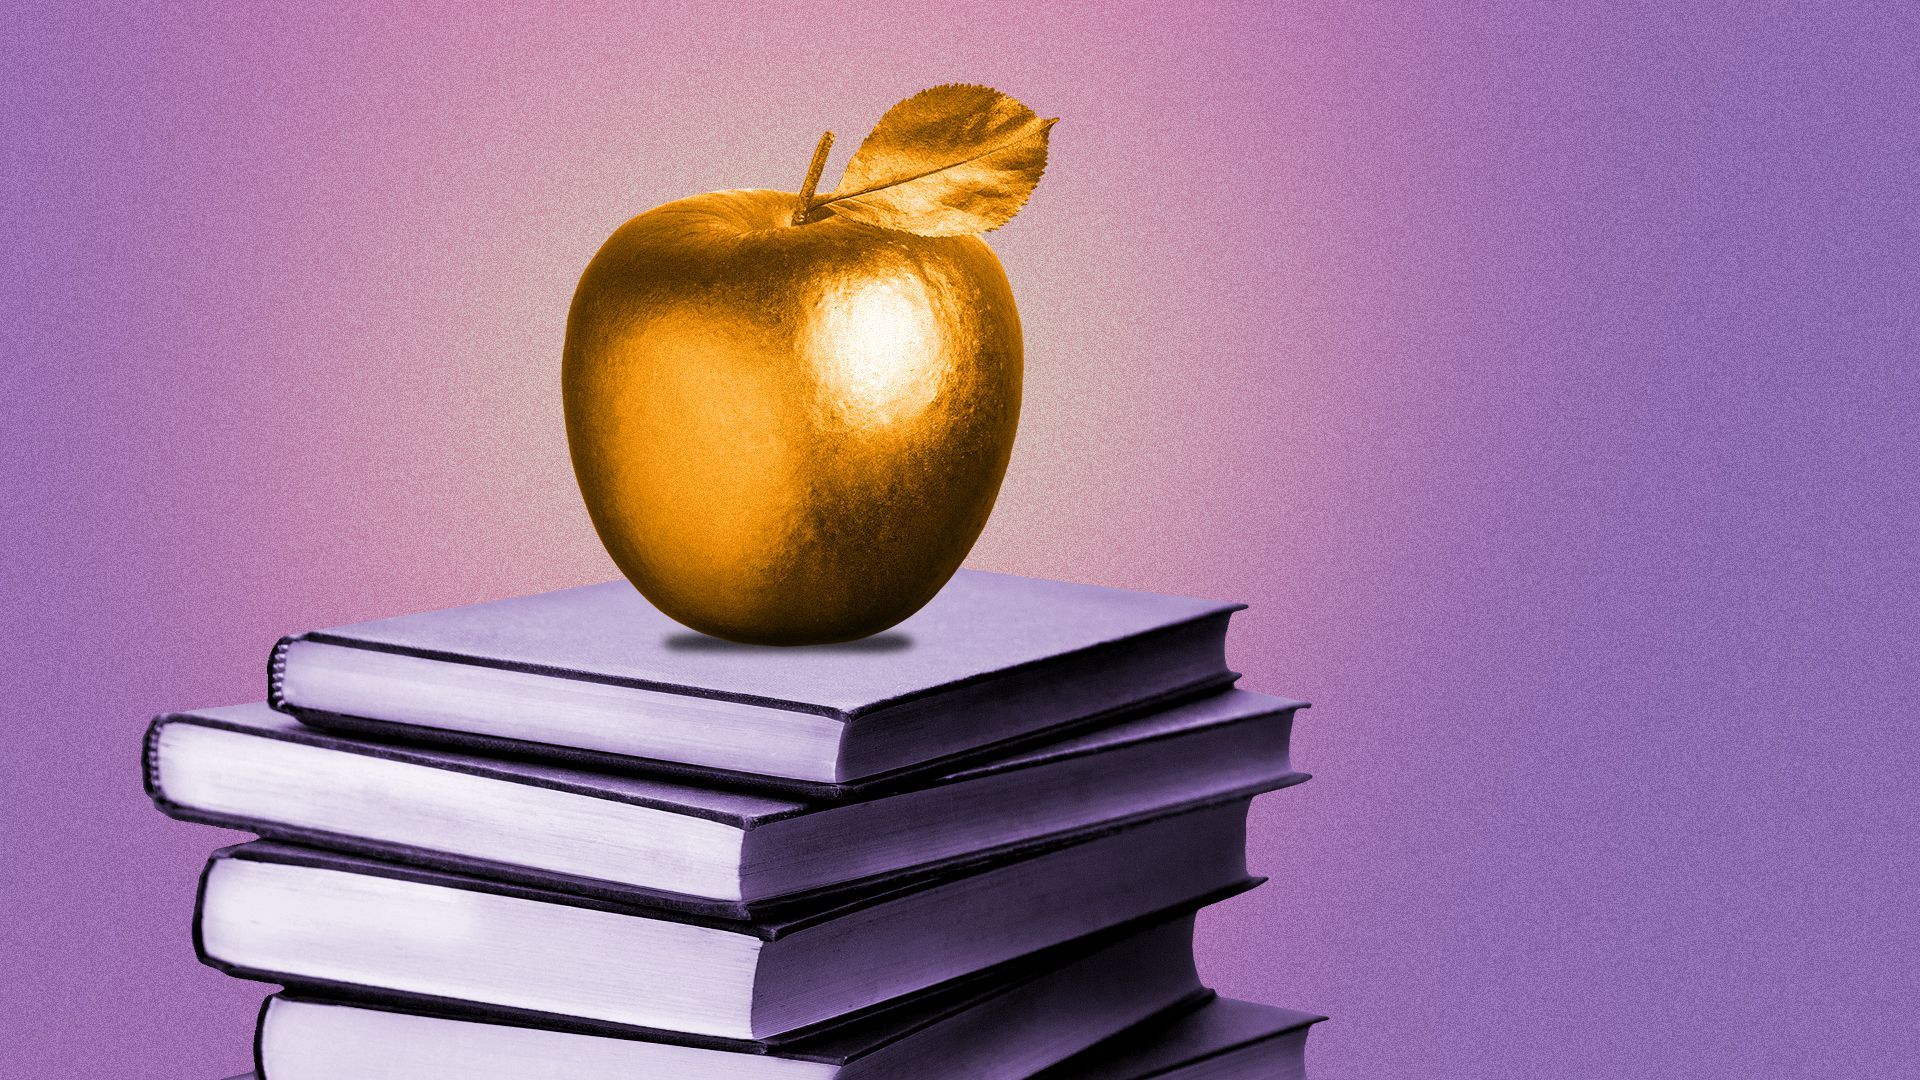 Illustration of a golden apple on a stack of books.